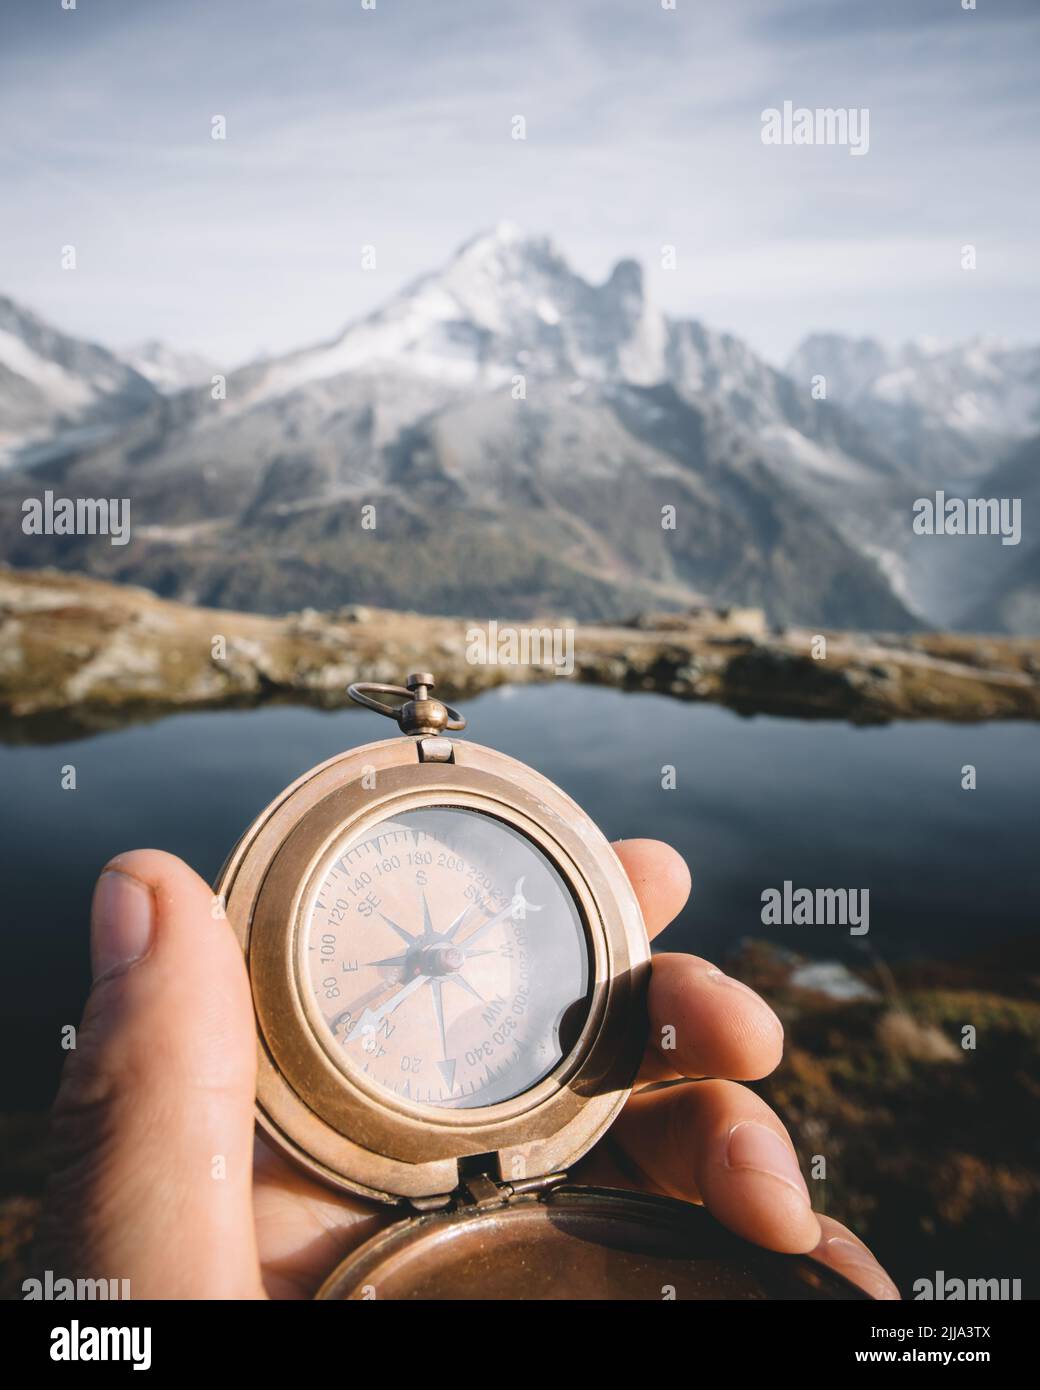 Man with compass in hand in high mountains near clear lake. Travel concept. Landscape photography Stock Photo